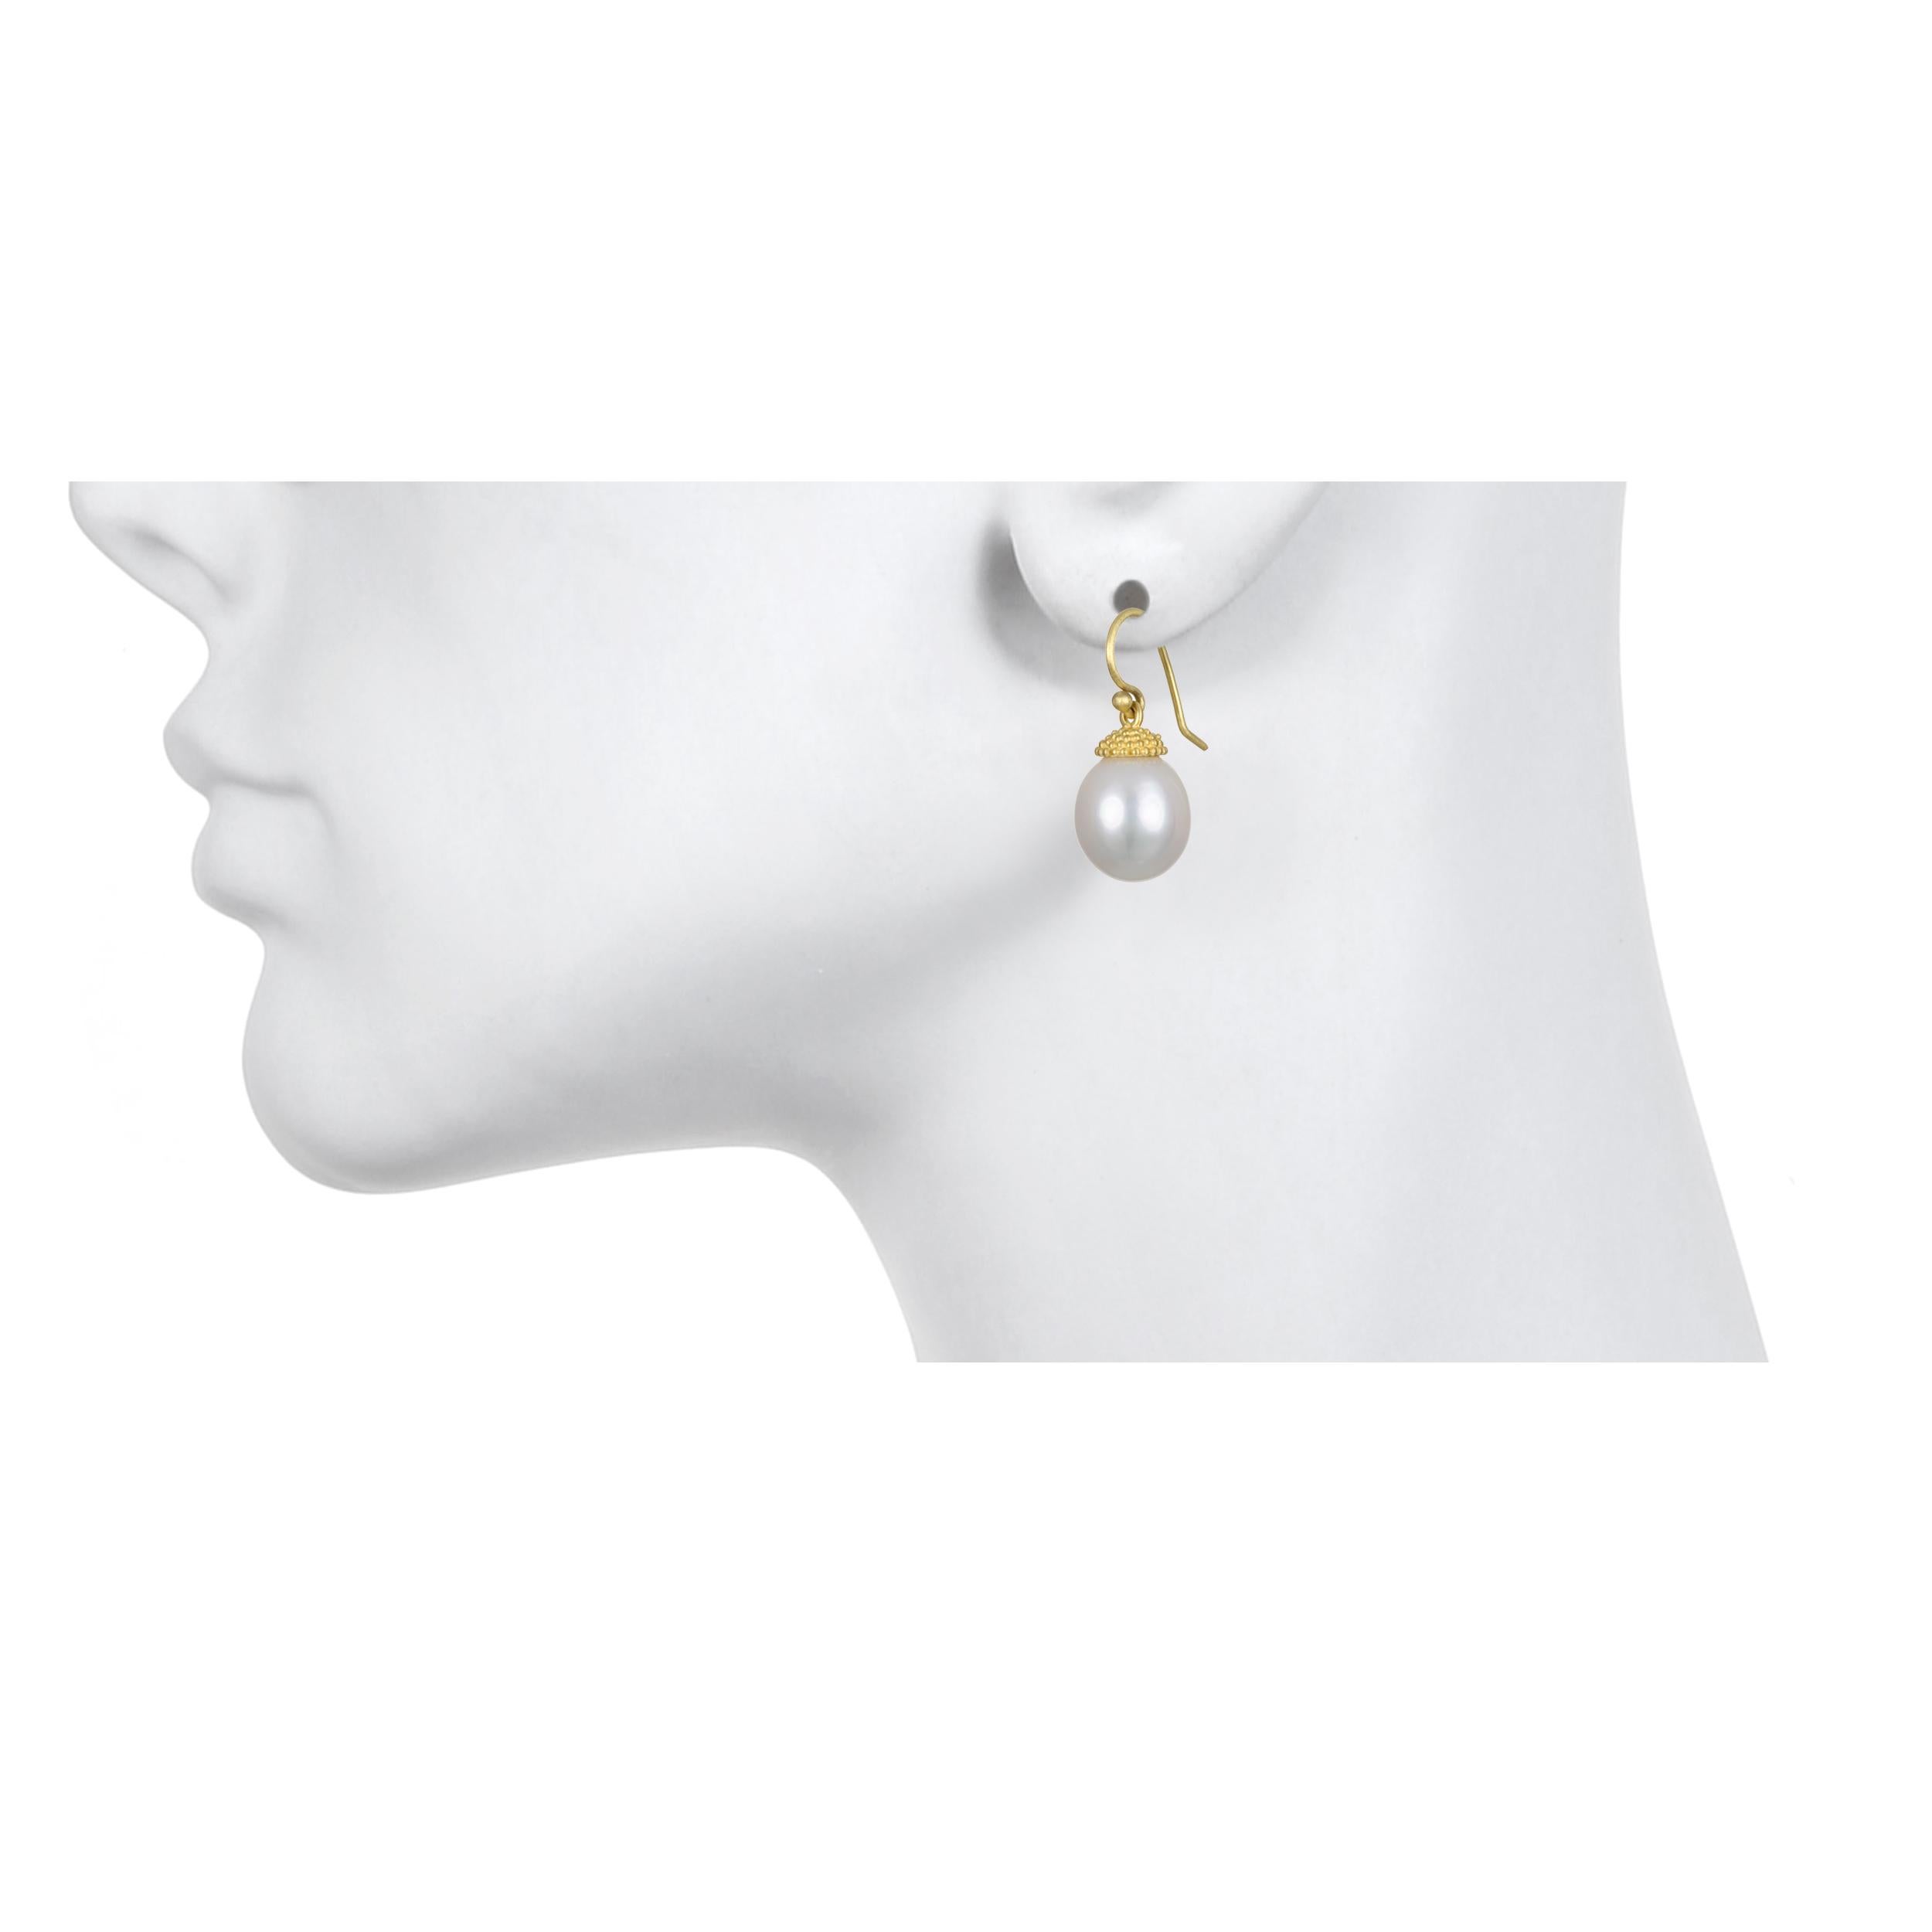 A perennial favorite from Faye Kim's signature earring collection. Lustrous white freshwater pearls with a touch of rose overtone are finished with a granulation cap and ear wires. Perfect for casual or dressy occasions.
*Although all pearls are